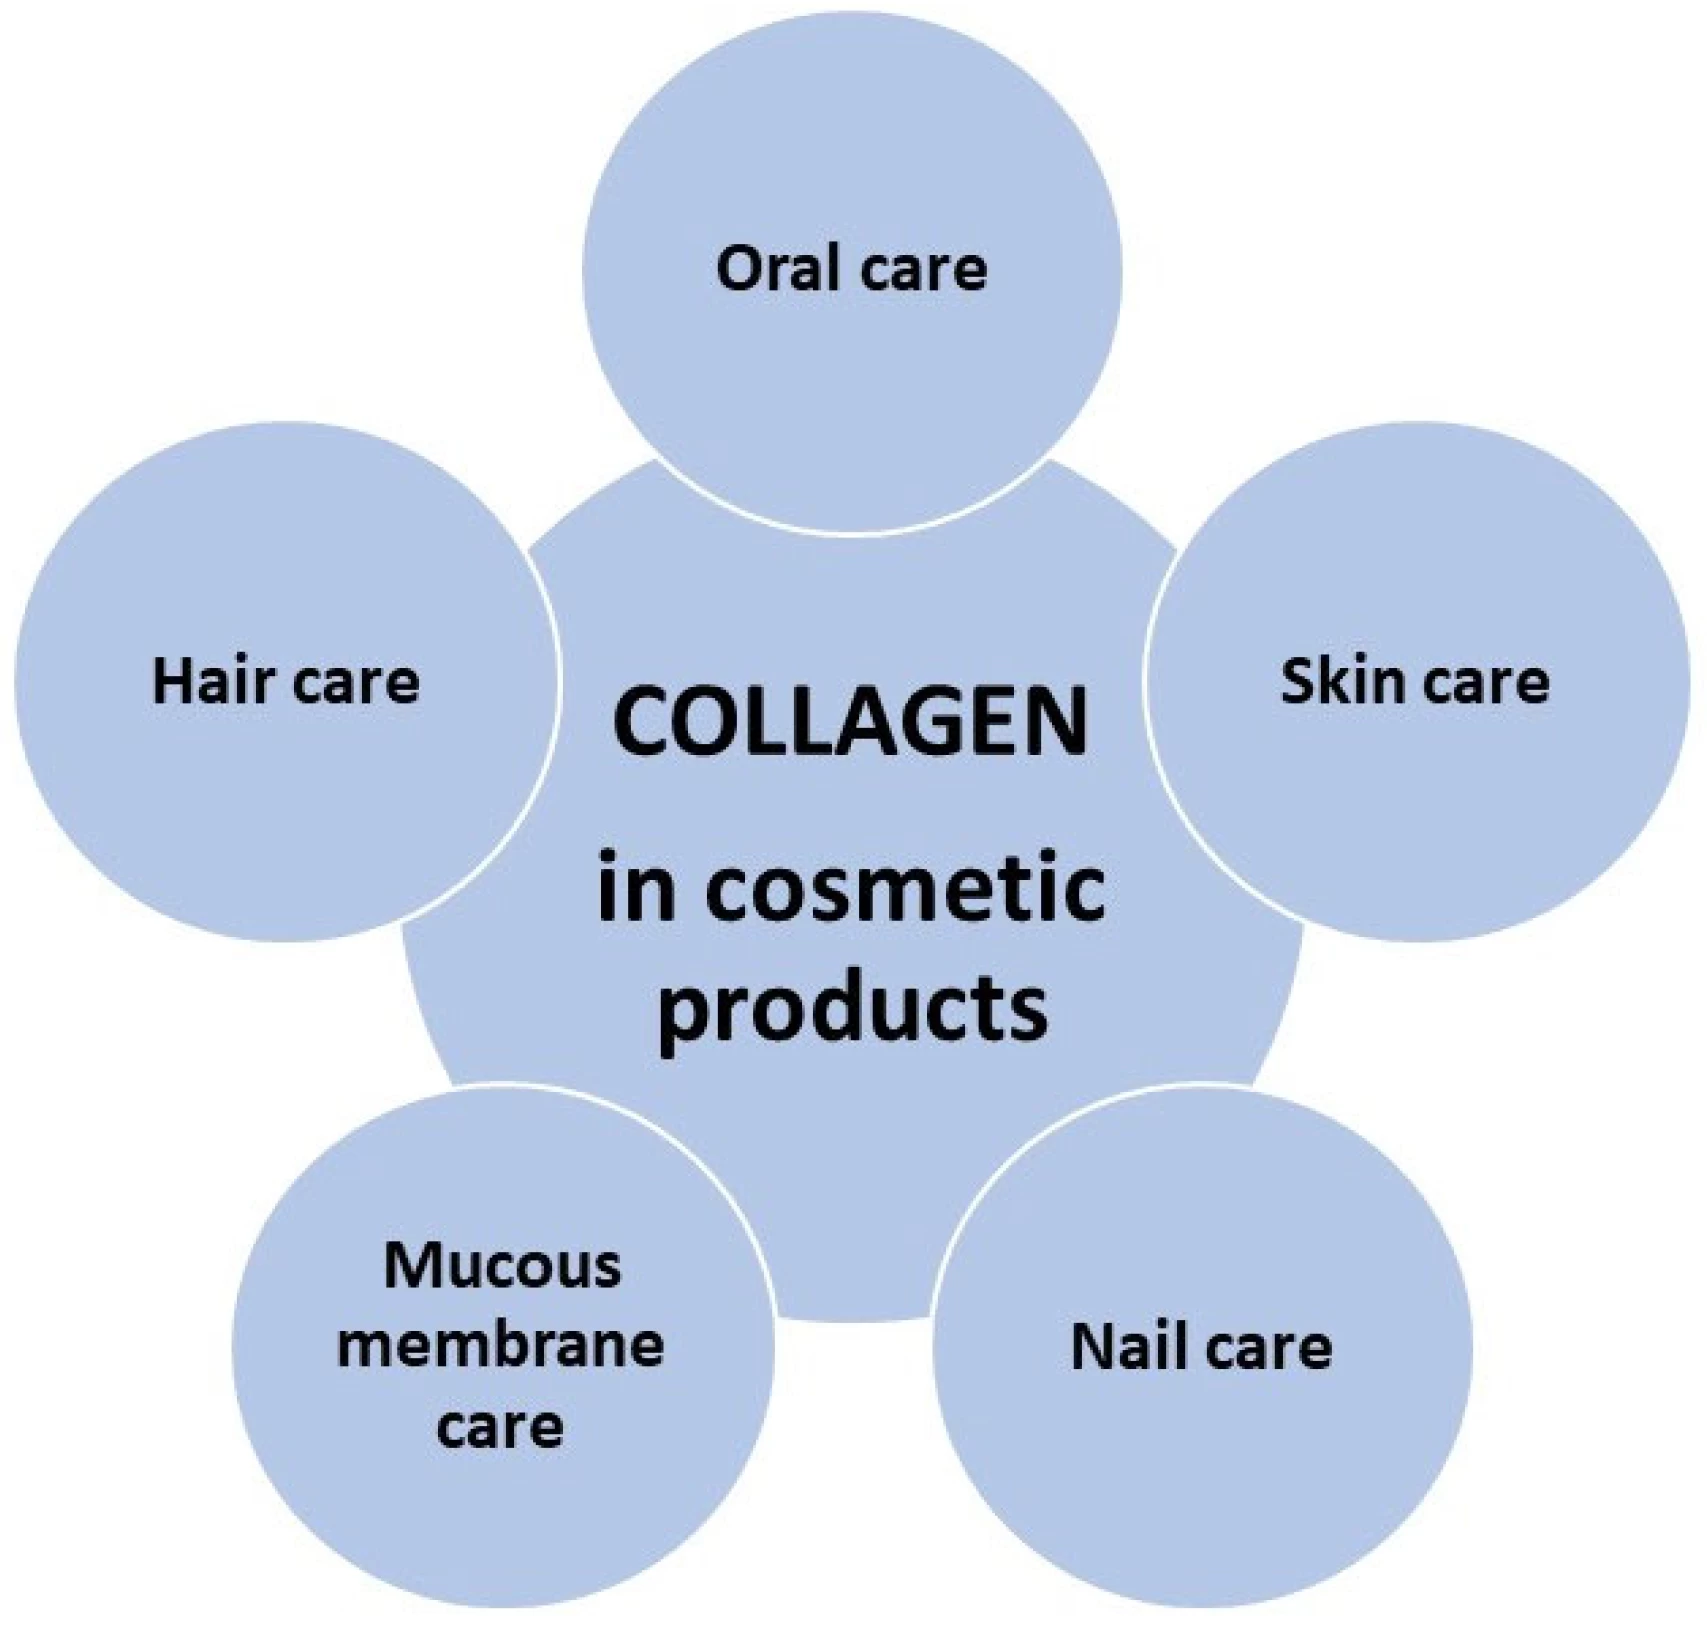 How is Collagen Related to Skin Health?